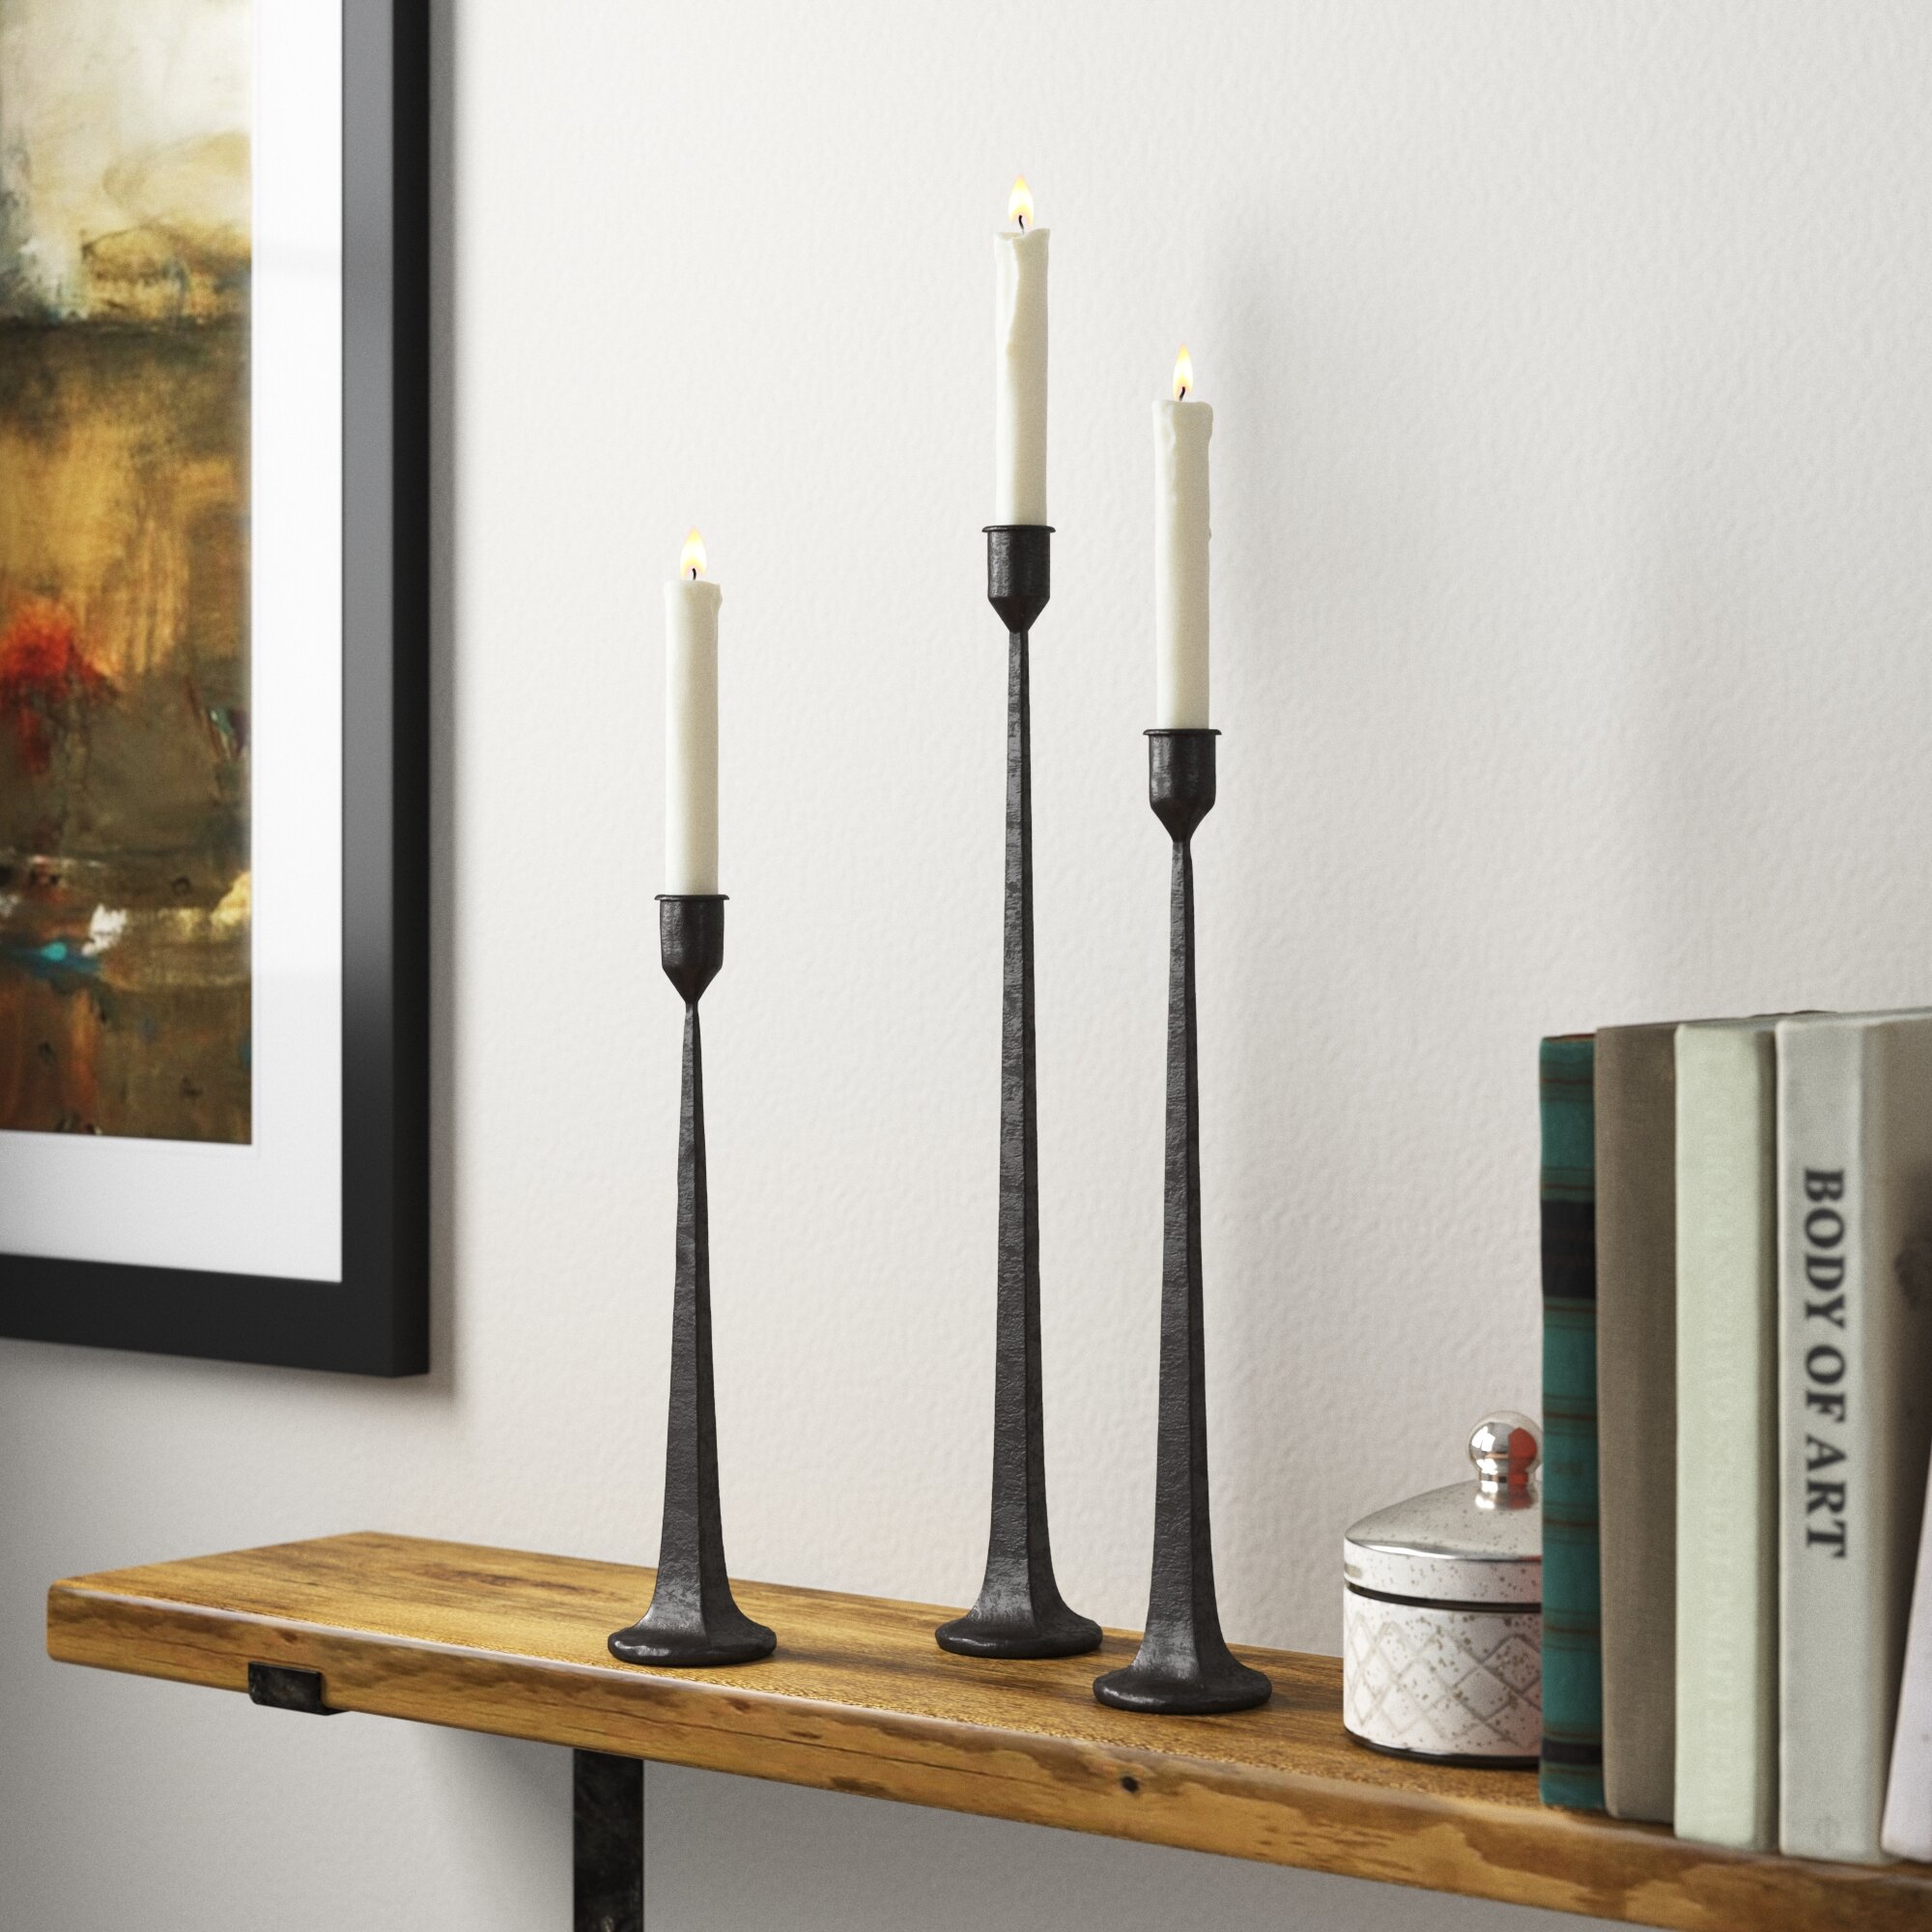 Wayfair | Black Candle Holders You'll Love in 2022